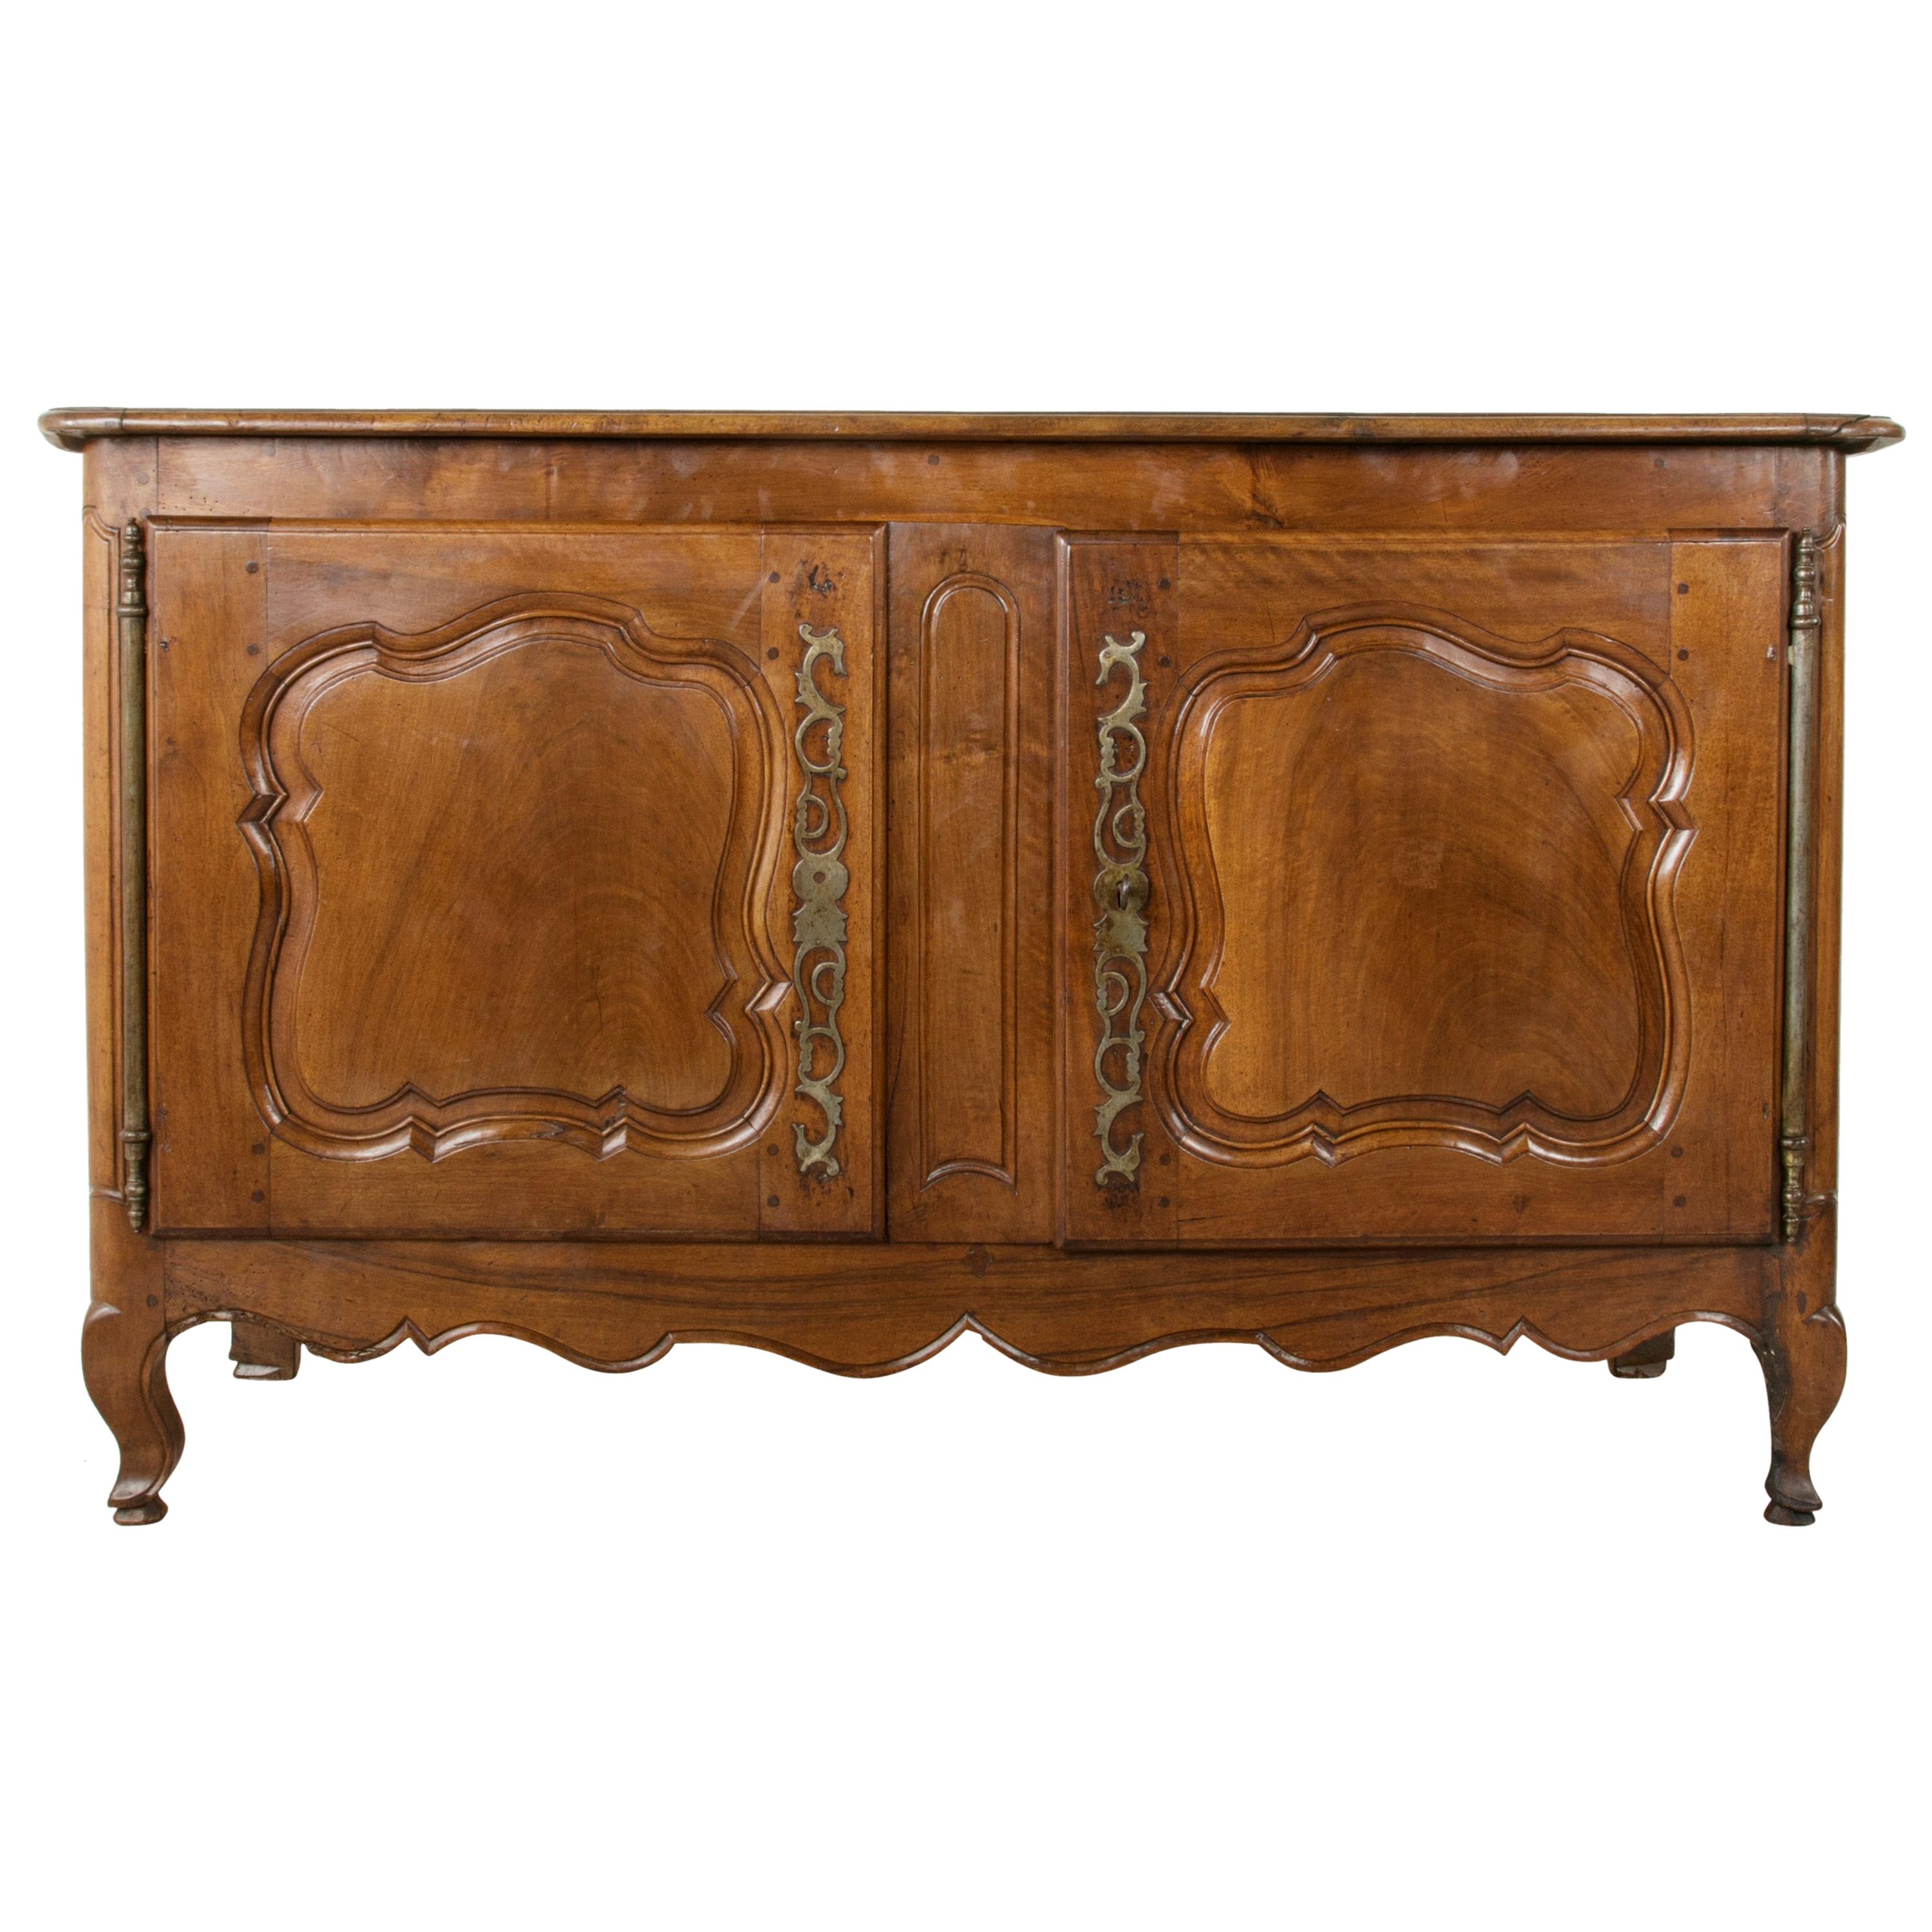 Late 19th Century French Louis XV Style Walnut Buffet, Sideboard